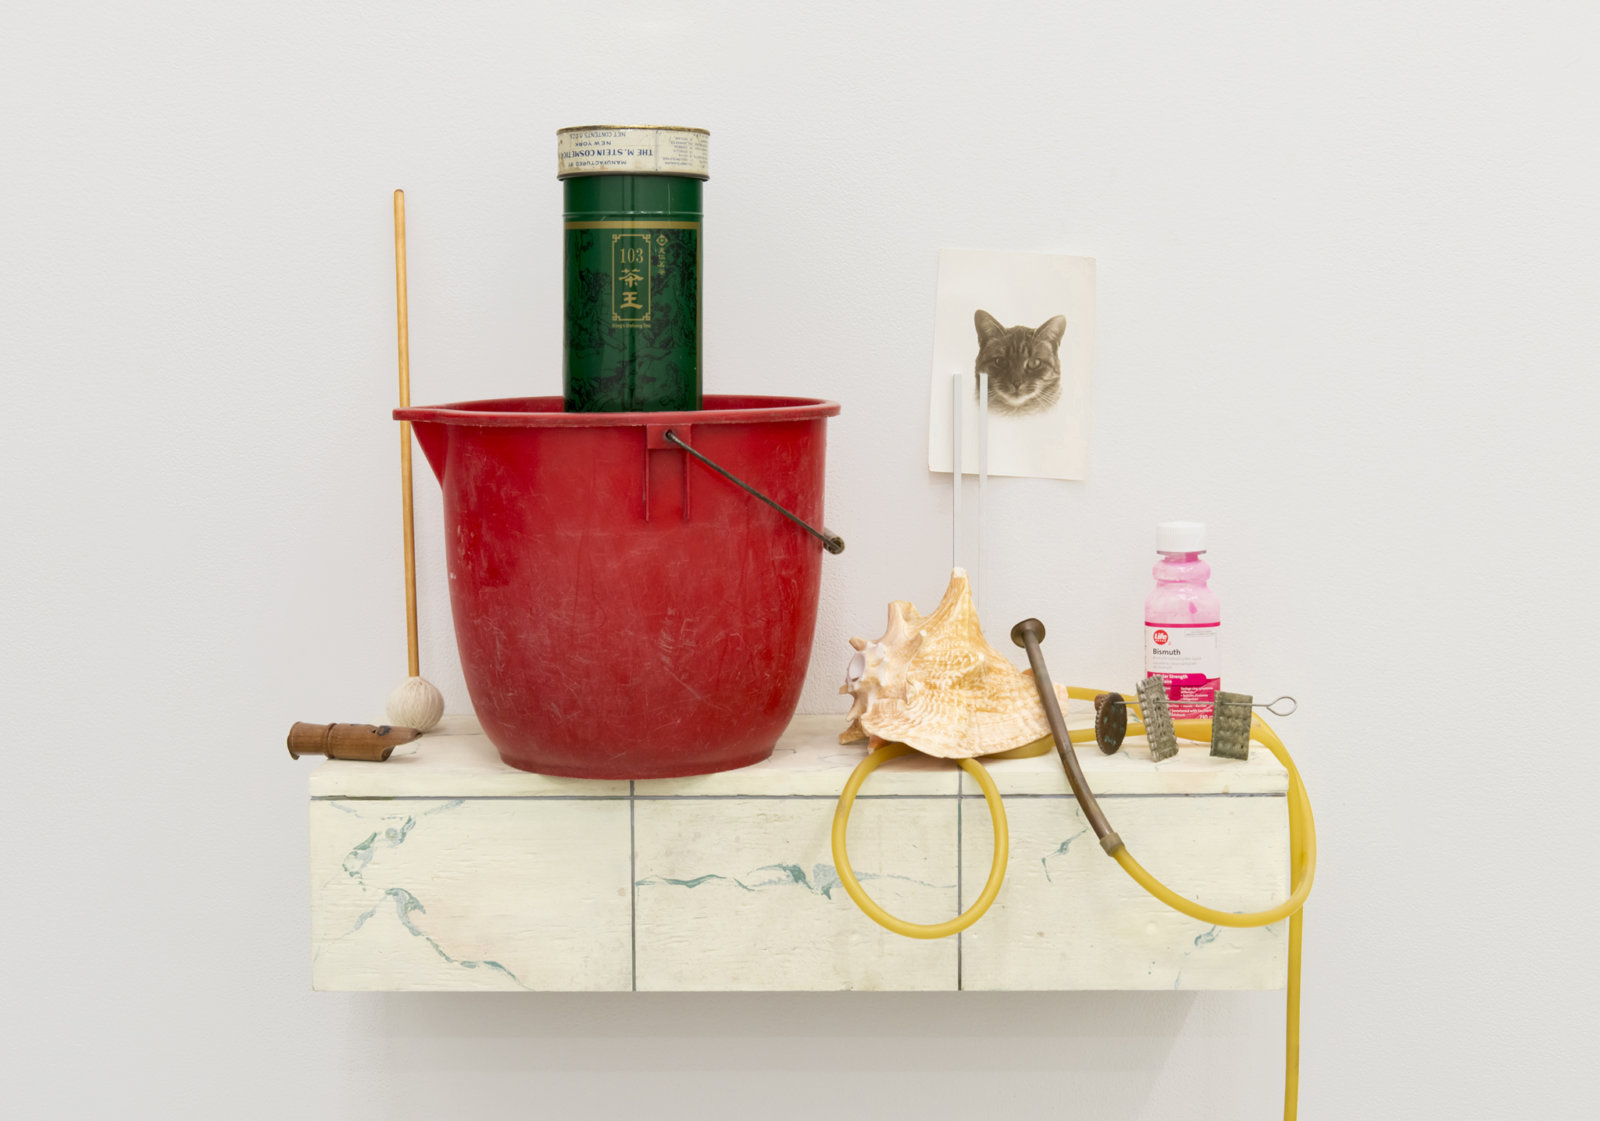 Ashes Withyman, Cetus, River, Furnas, Musca, Compass, Altar, Cup, 2017–2018, plastic bucket, tin, animal call parts, mallet, wood, medical tubing, conch, therapeutic tuning fork, cast: copper, brass and silver crackers, bismuth, wood, brass, bird whistle, found photograph, painted plywood, 44 x 28 x 13 in. (112 x 71 x 33 cm)